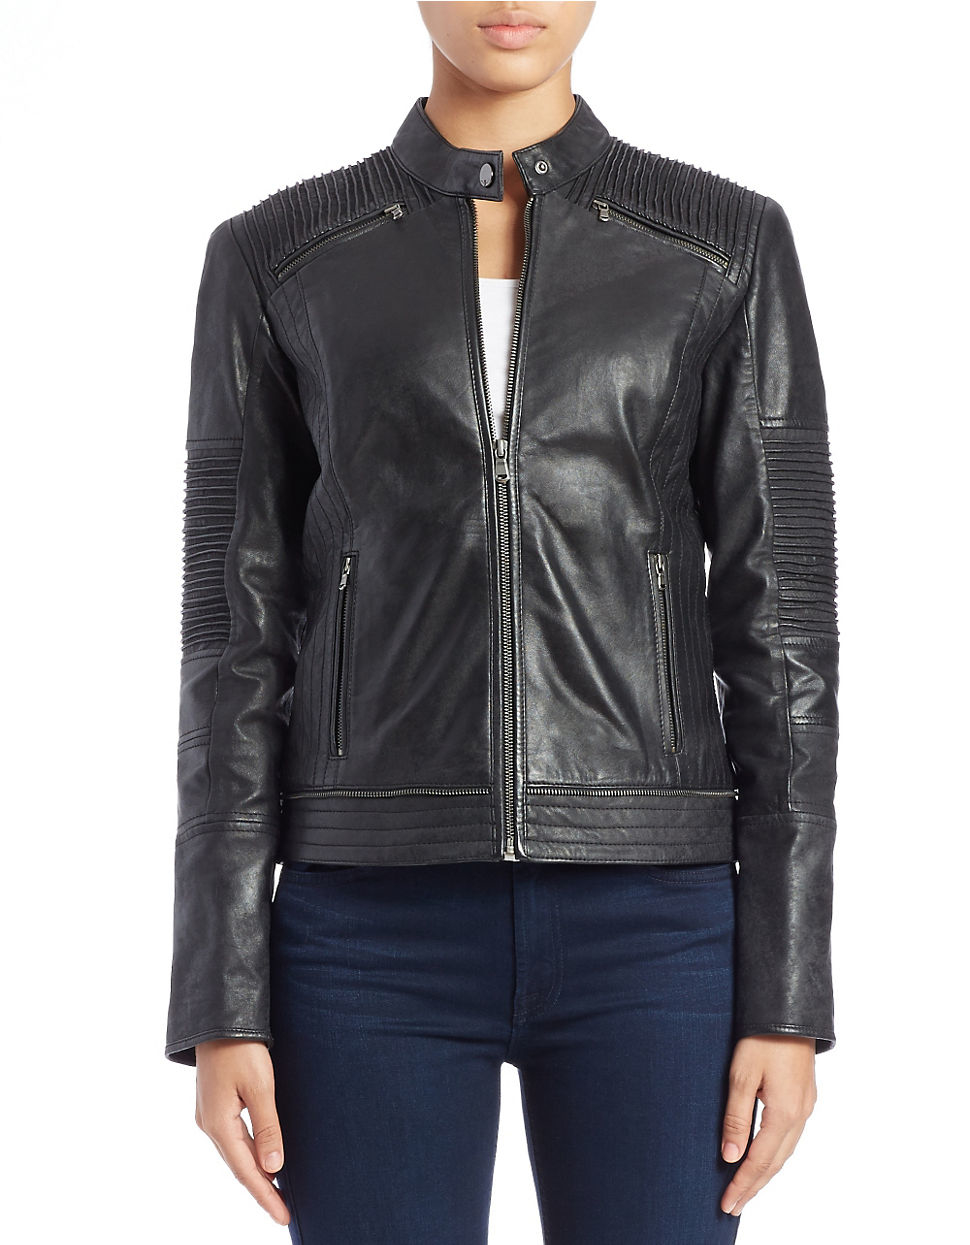 Lyst - 7 For All Mankind Moto Leather Jacket in Gray